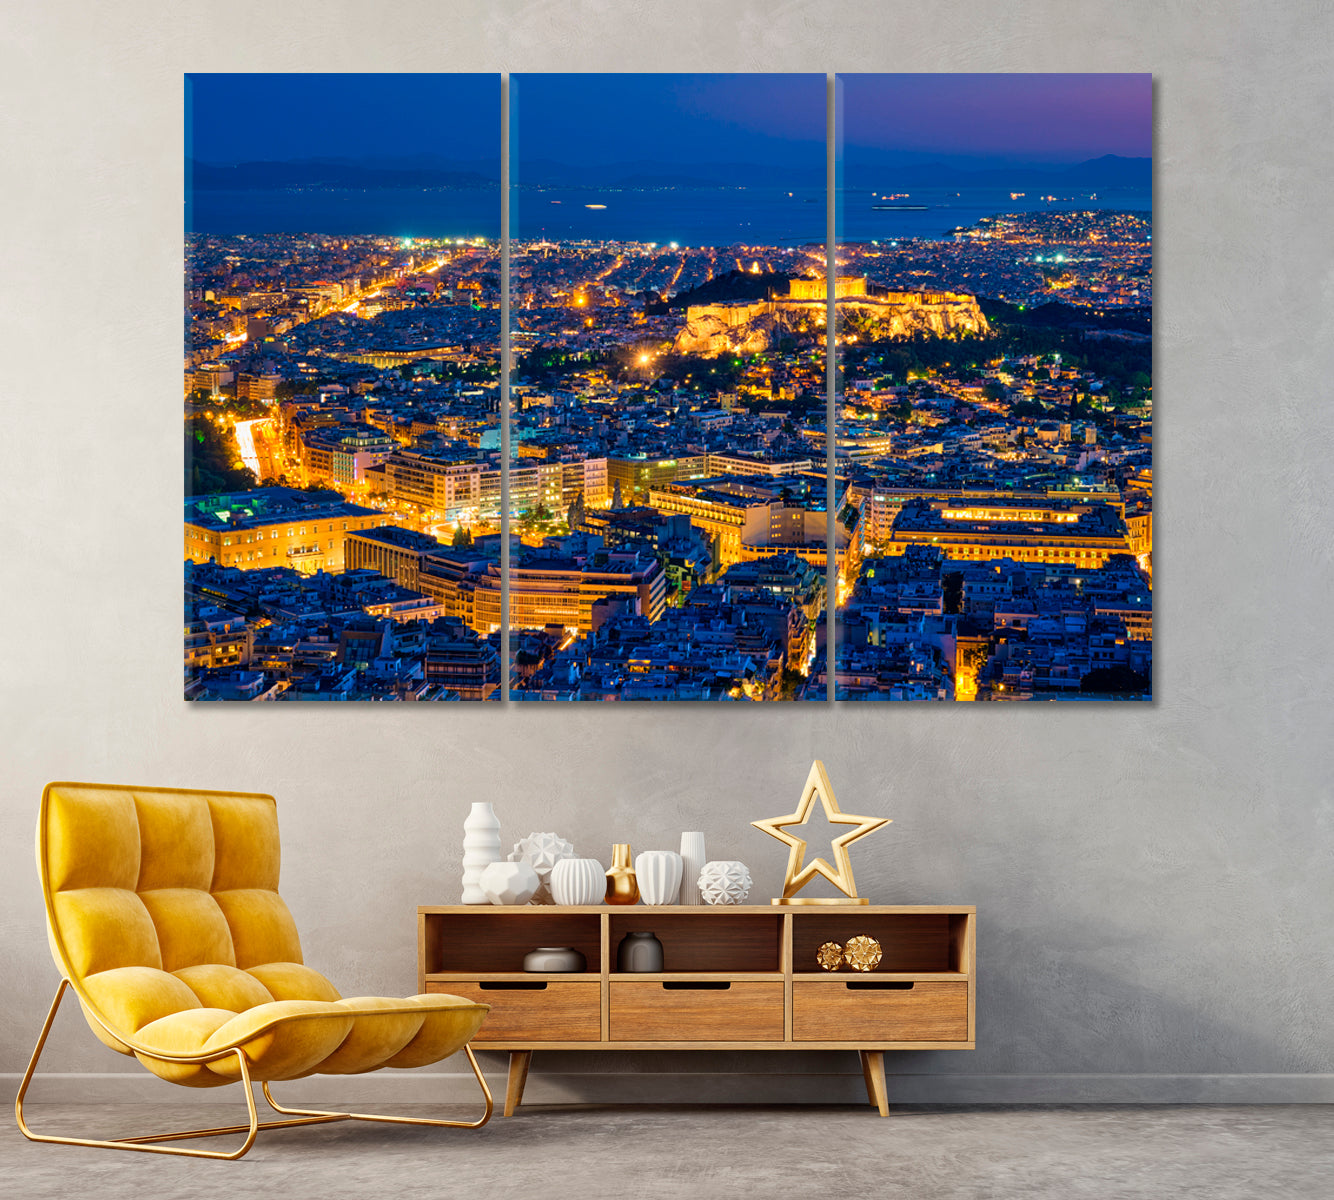 Athens Greece Canvas Print ArtLexy 3 Panels 36"x24" inches 